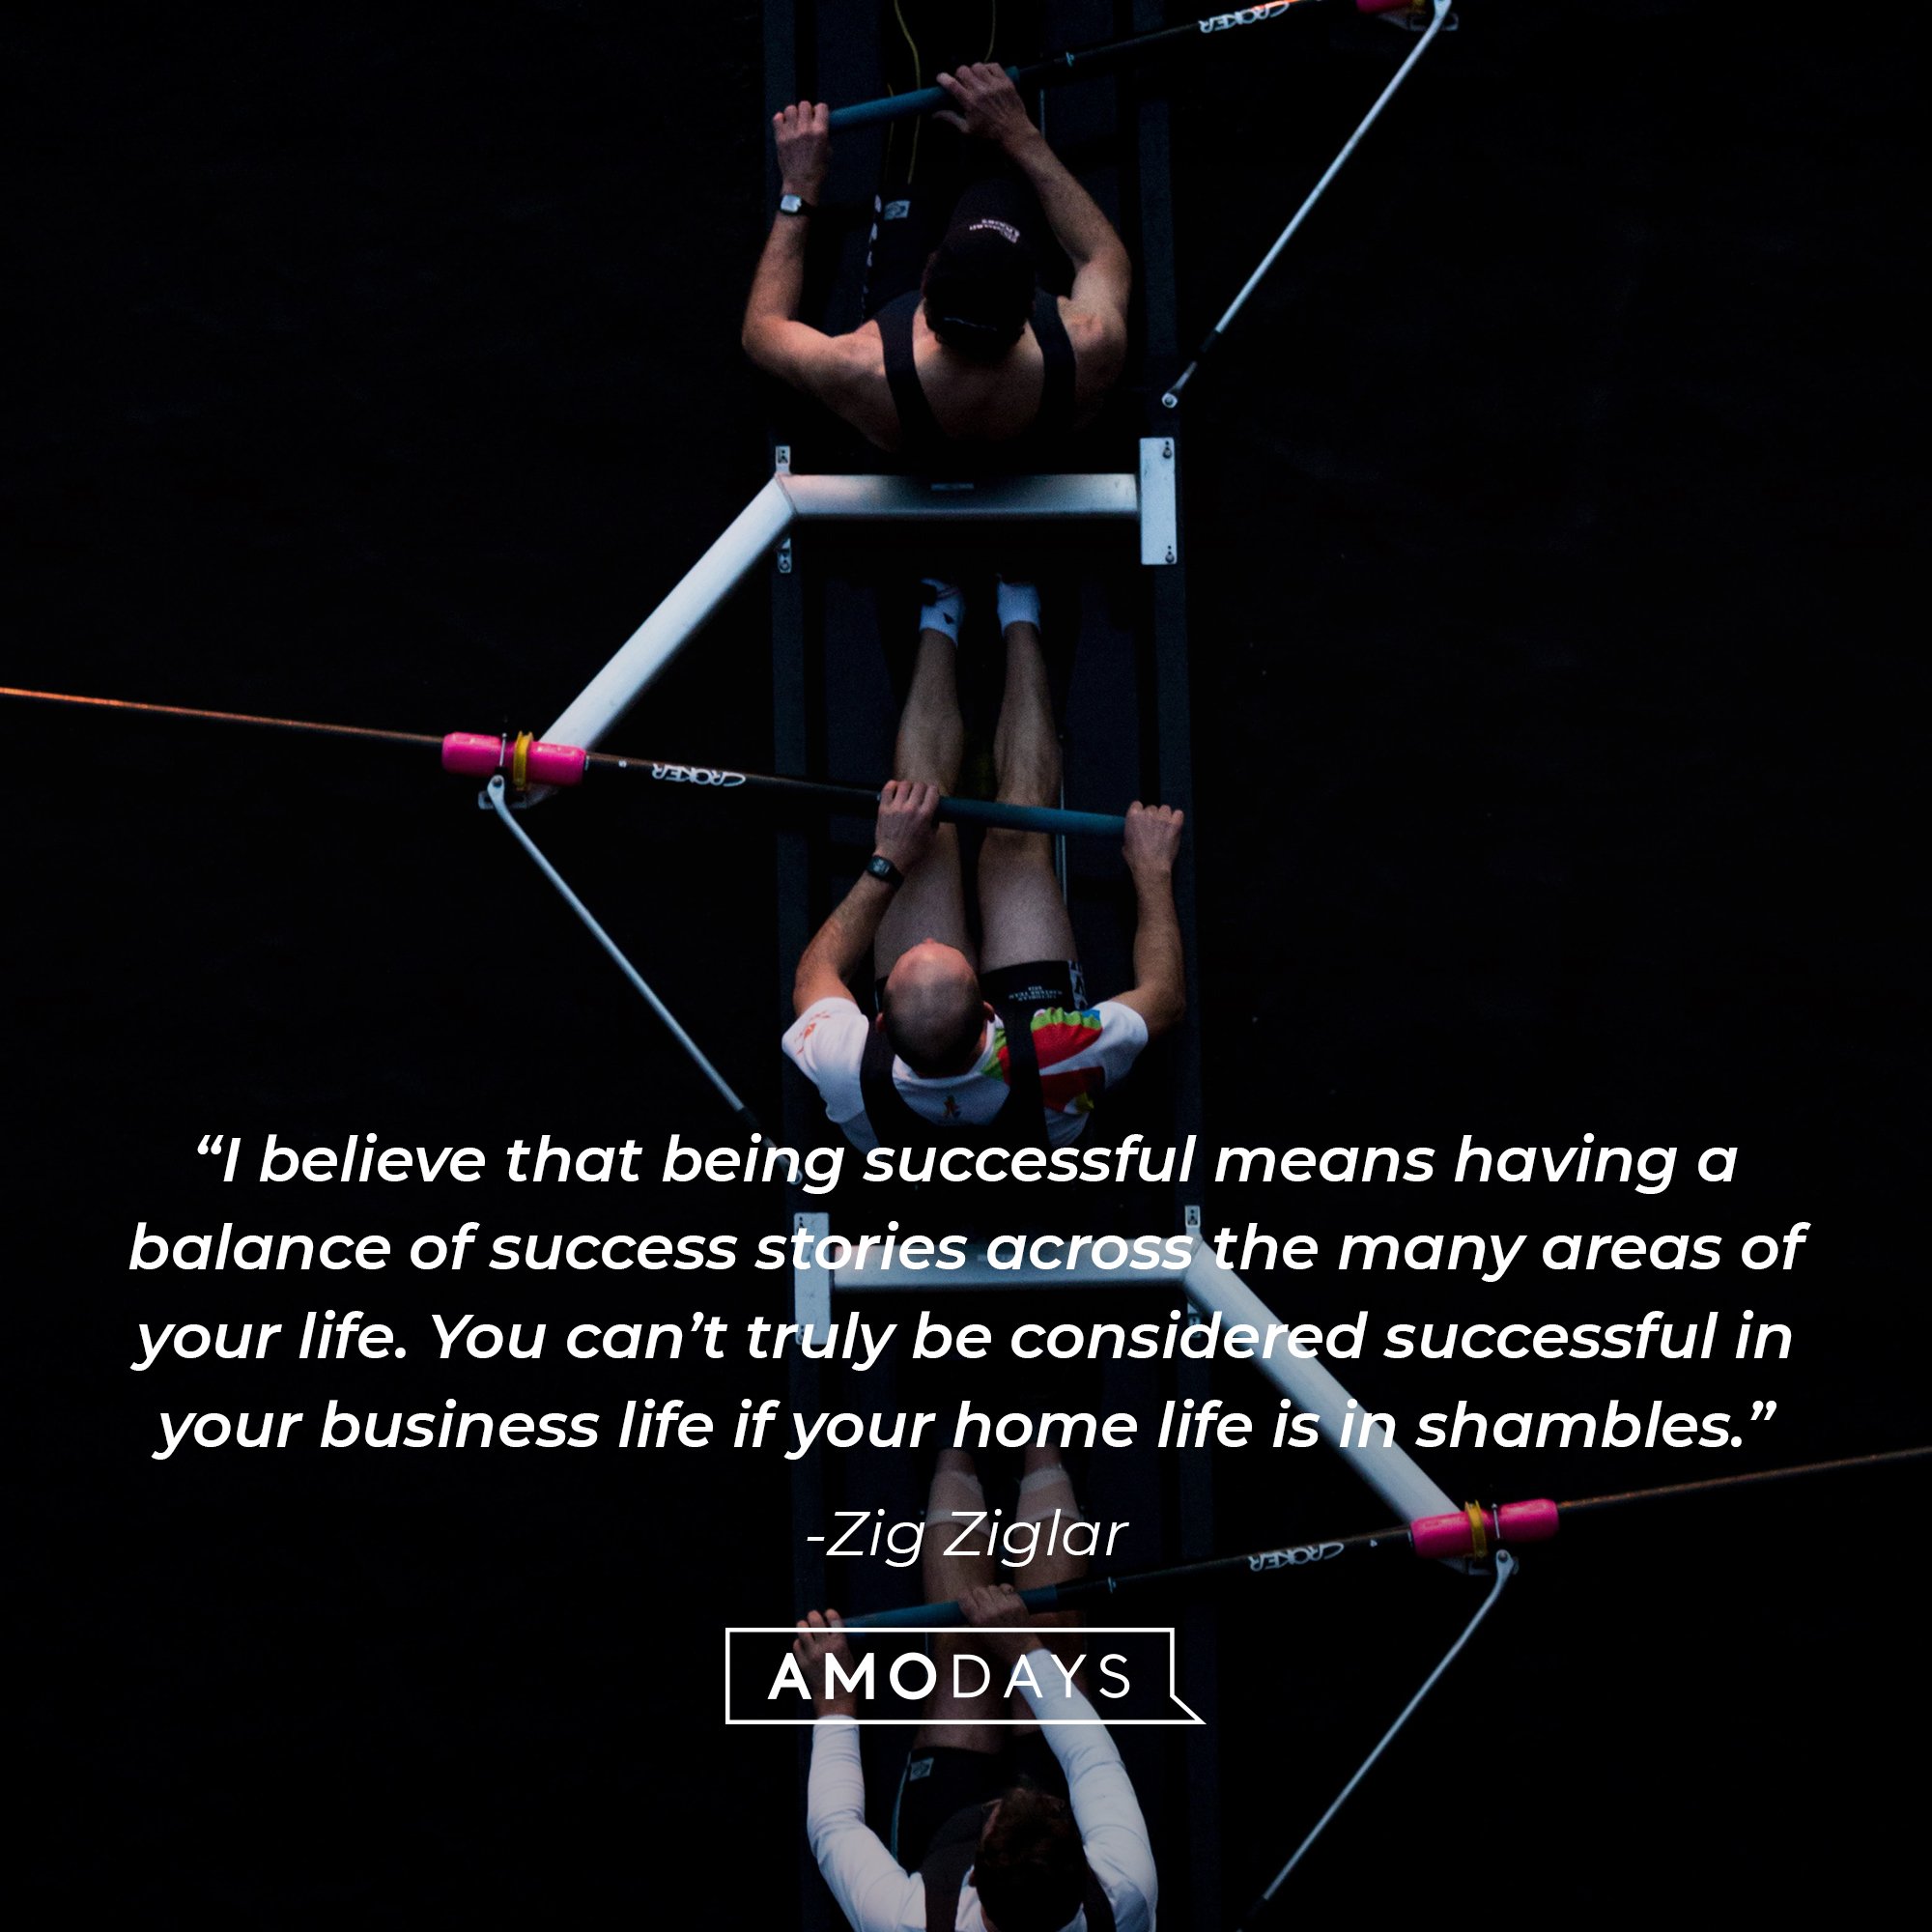 Zig Ziglar's quote: “I believe that being successful means having a balance of success stories across the many areas of your life. You can’t truly be considered successful in your business life if your home life is in shambles.” | Image: AmoDays